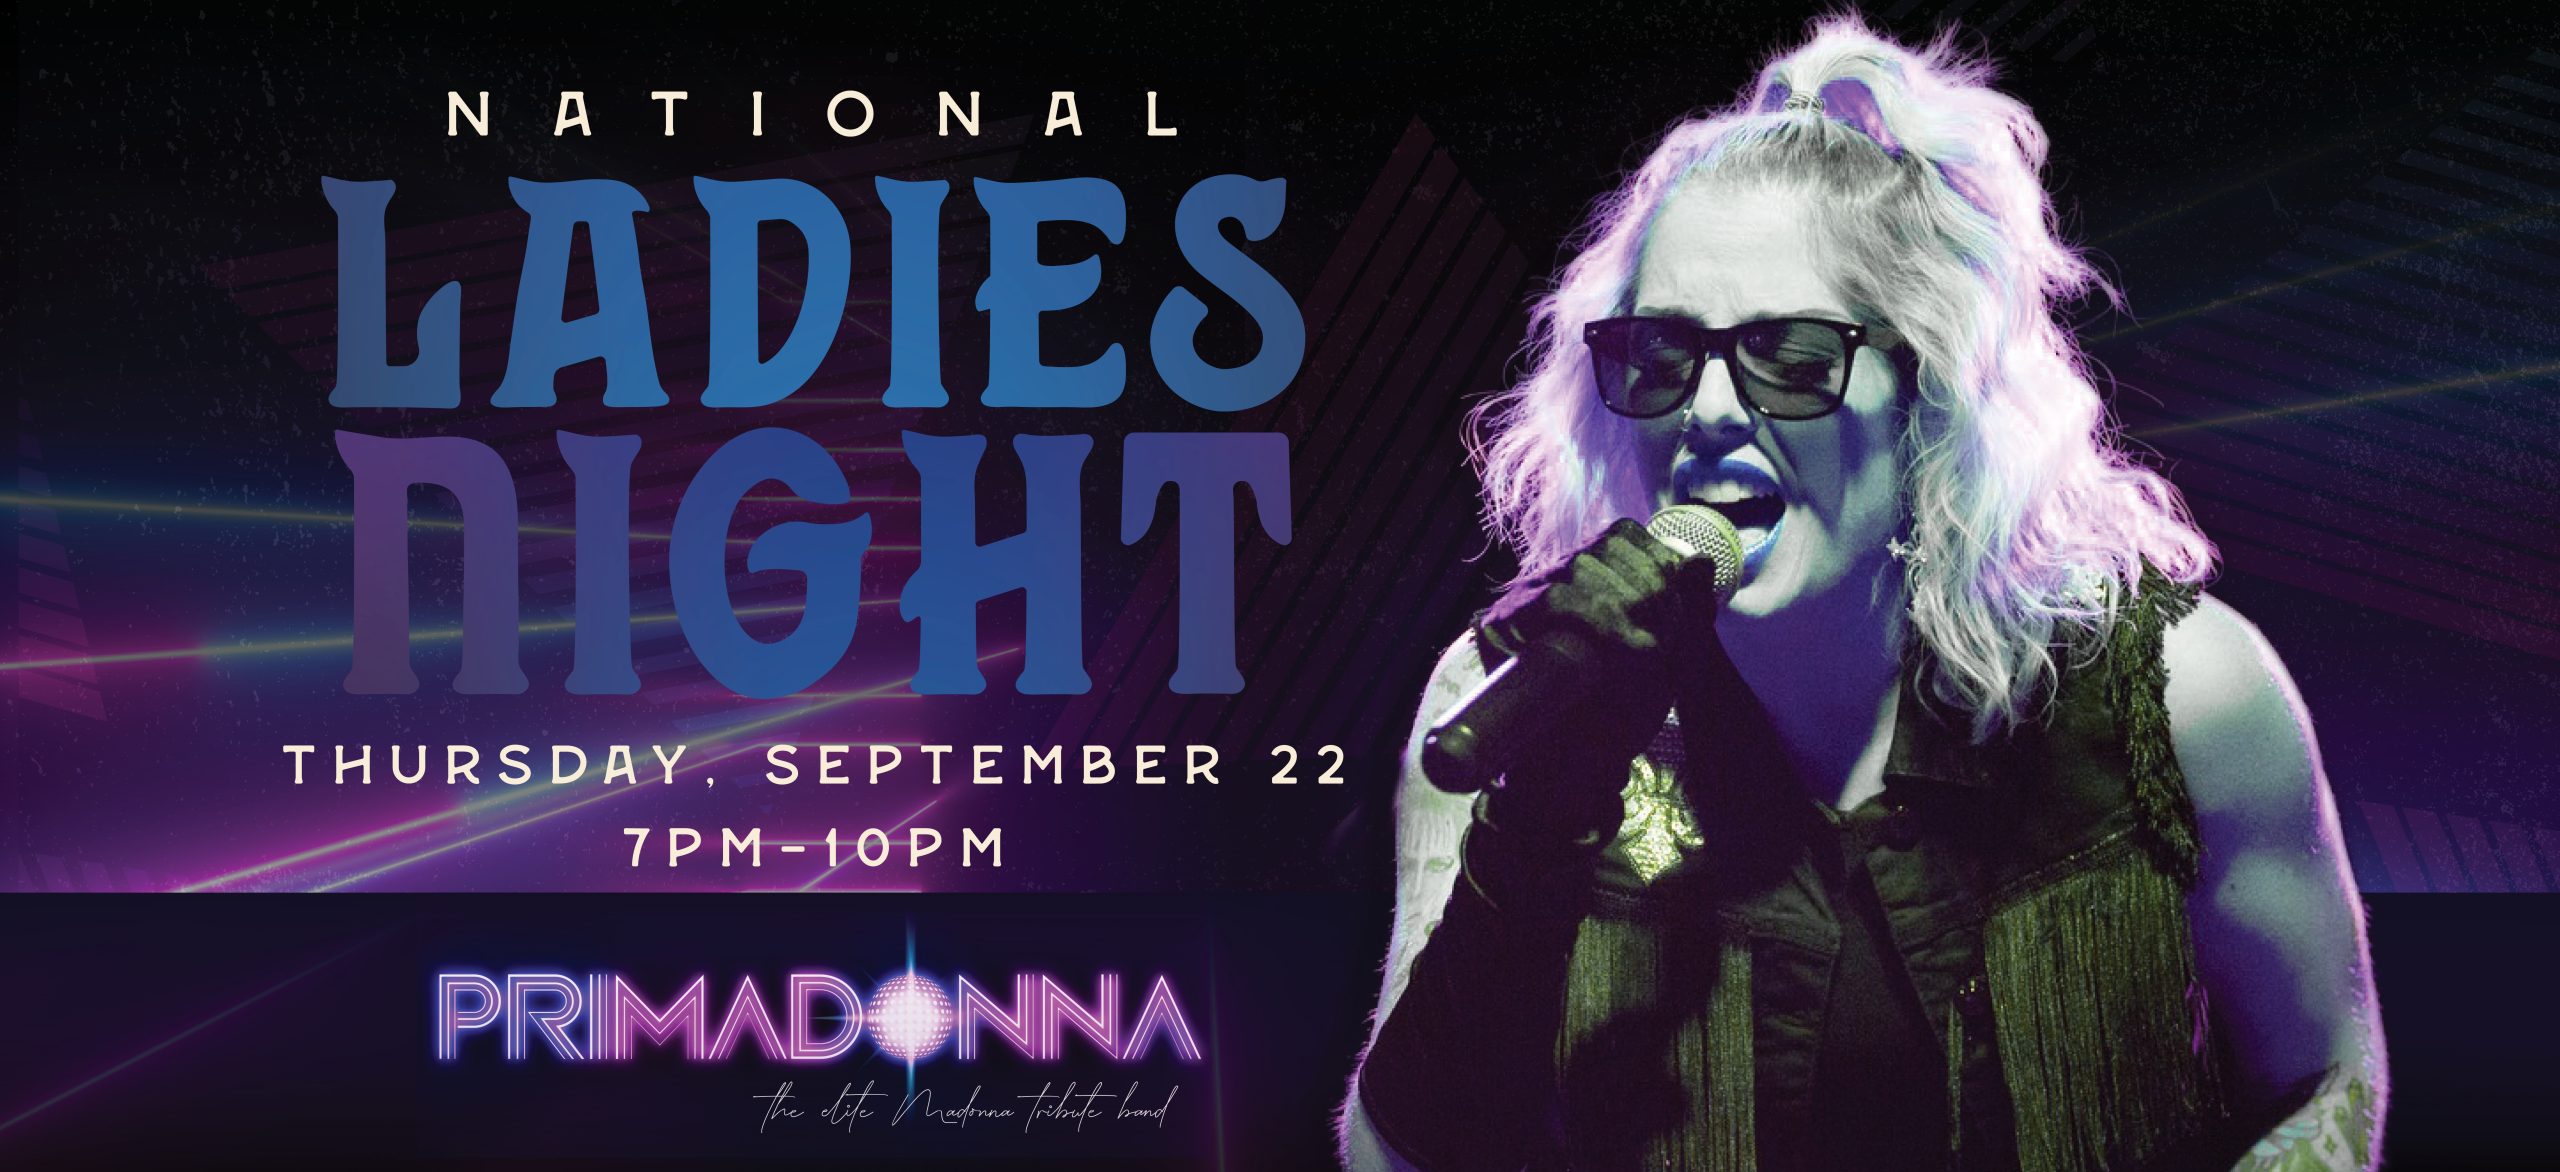 Background image for National Ladies Night